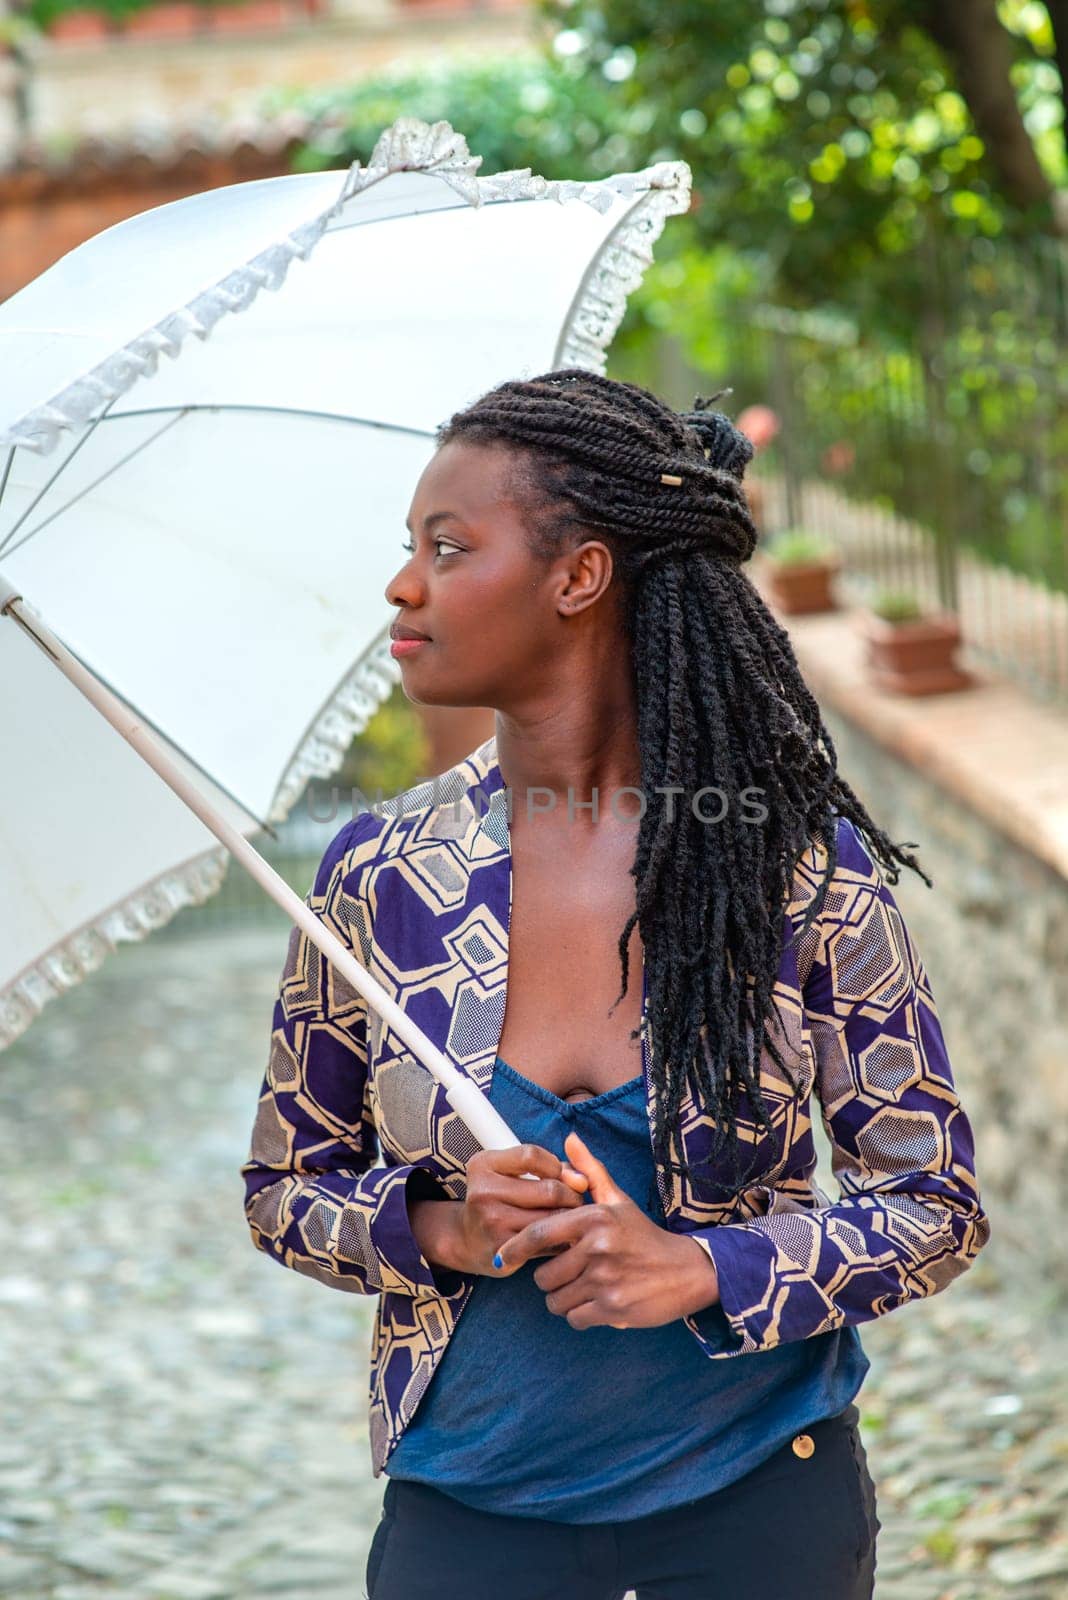 Portrait of an African woman with dreadlocks braid with umbrella parasol. Happy young woman feeling confident in her style. Fashionable woman standing in the street of old village against stone wall.